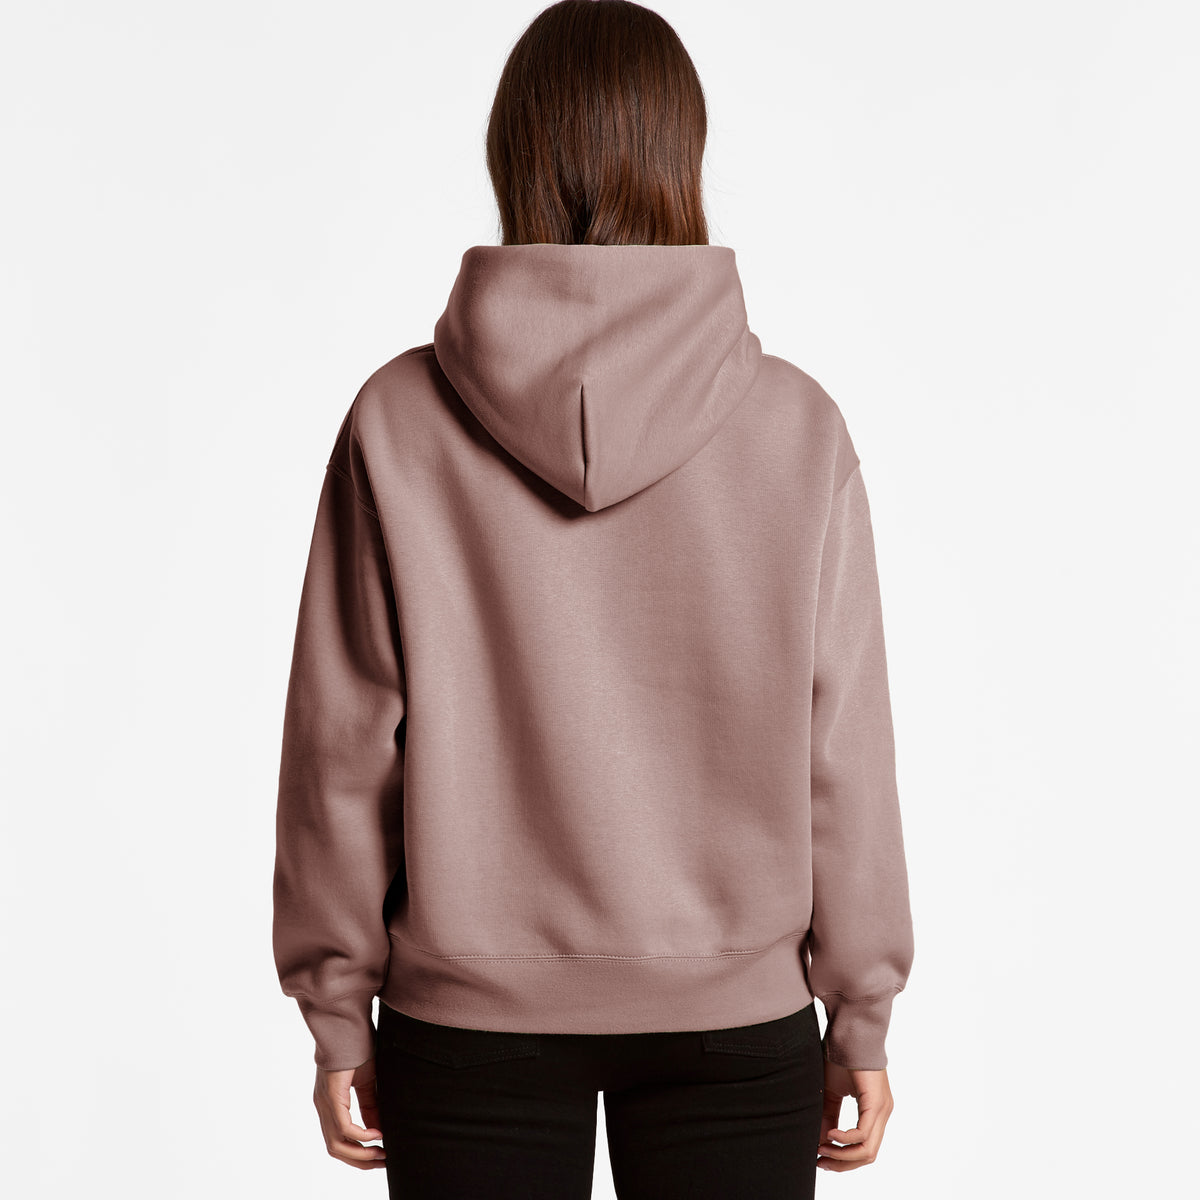 Bellis perennis - The Common Daisy - Women&#39;s Heavyweight Relaxed Hoodie